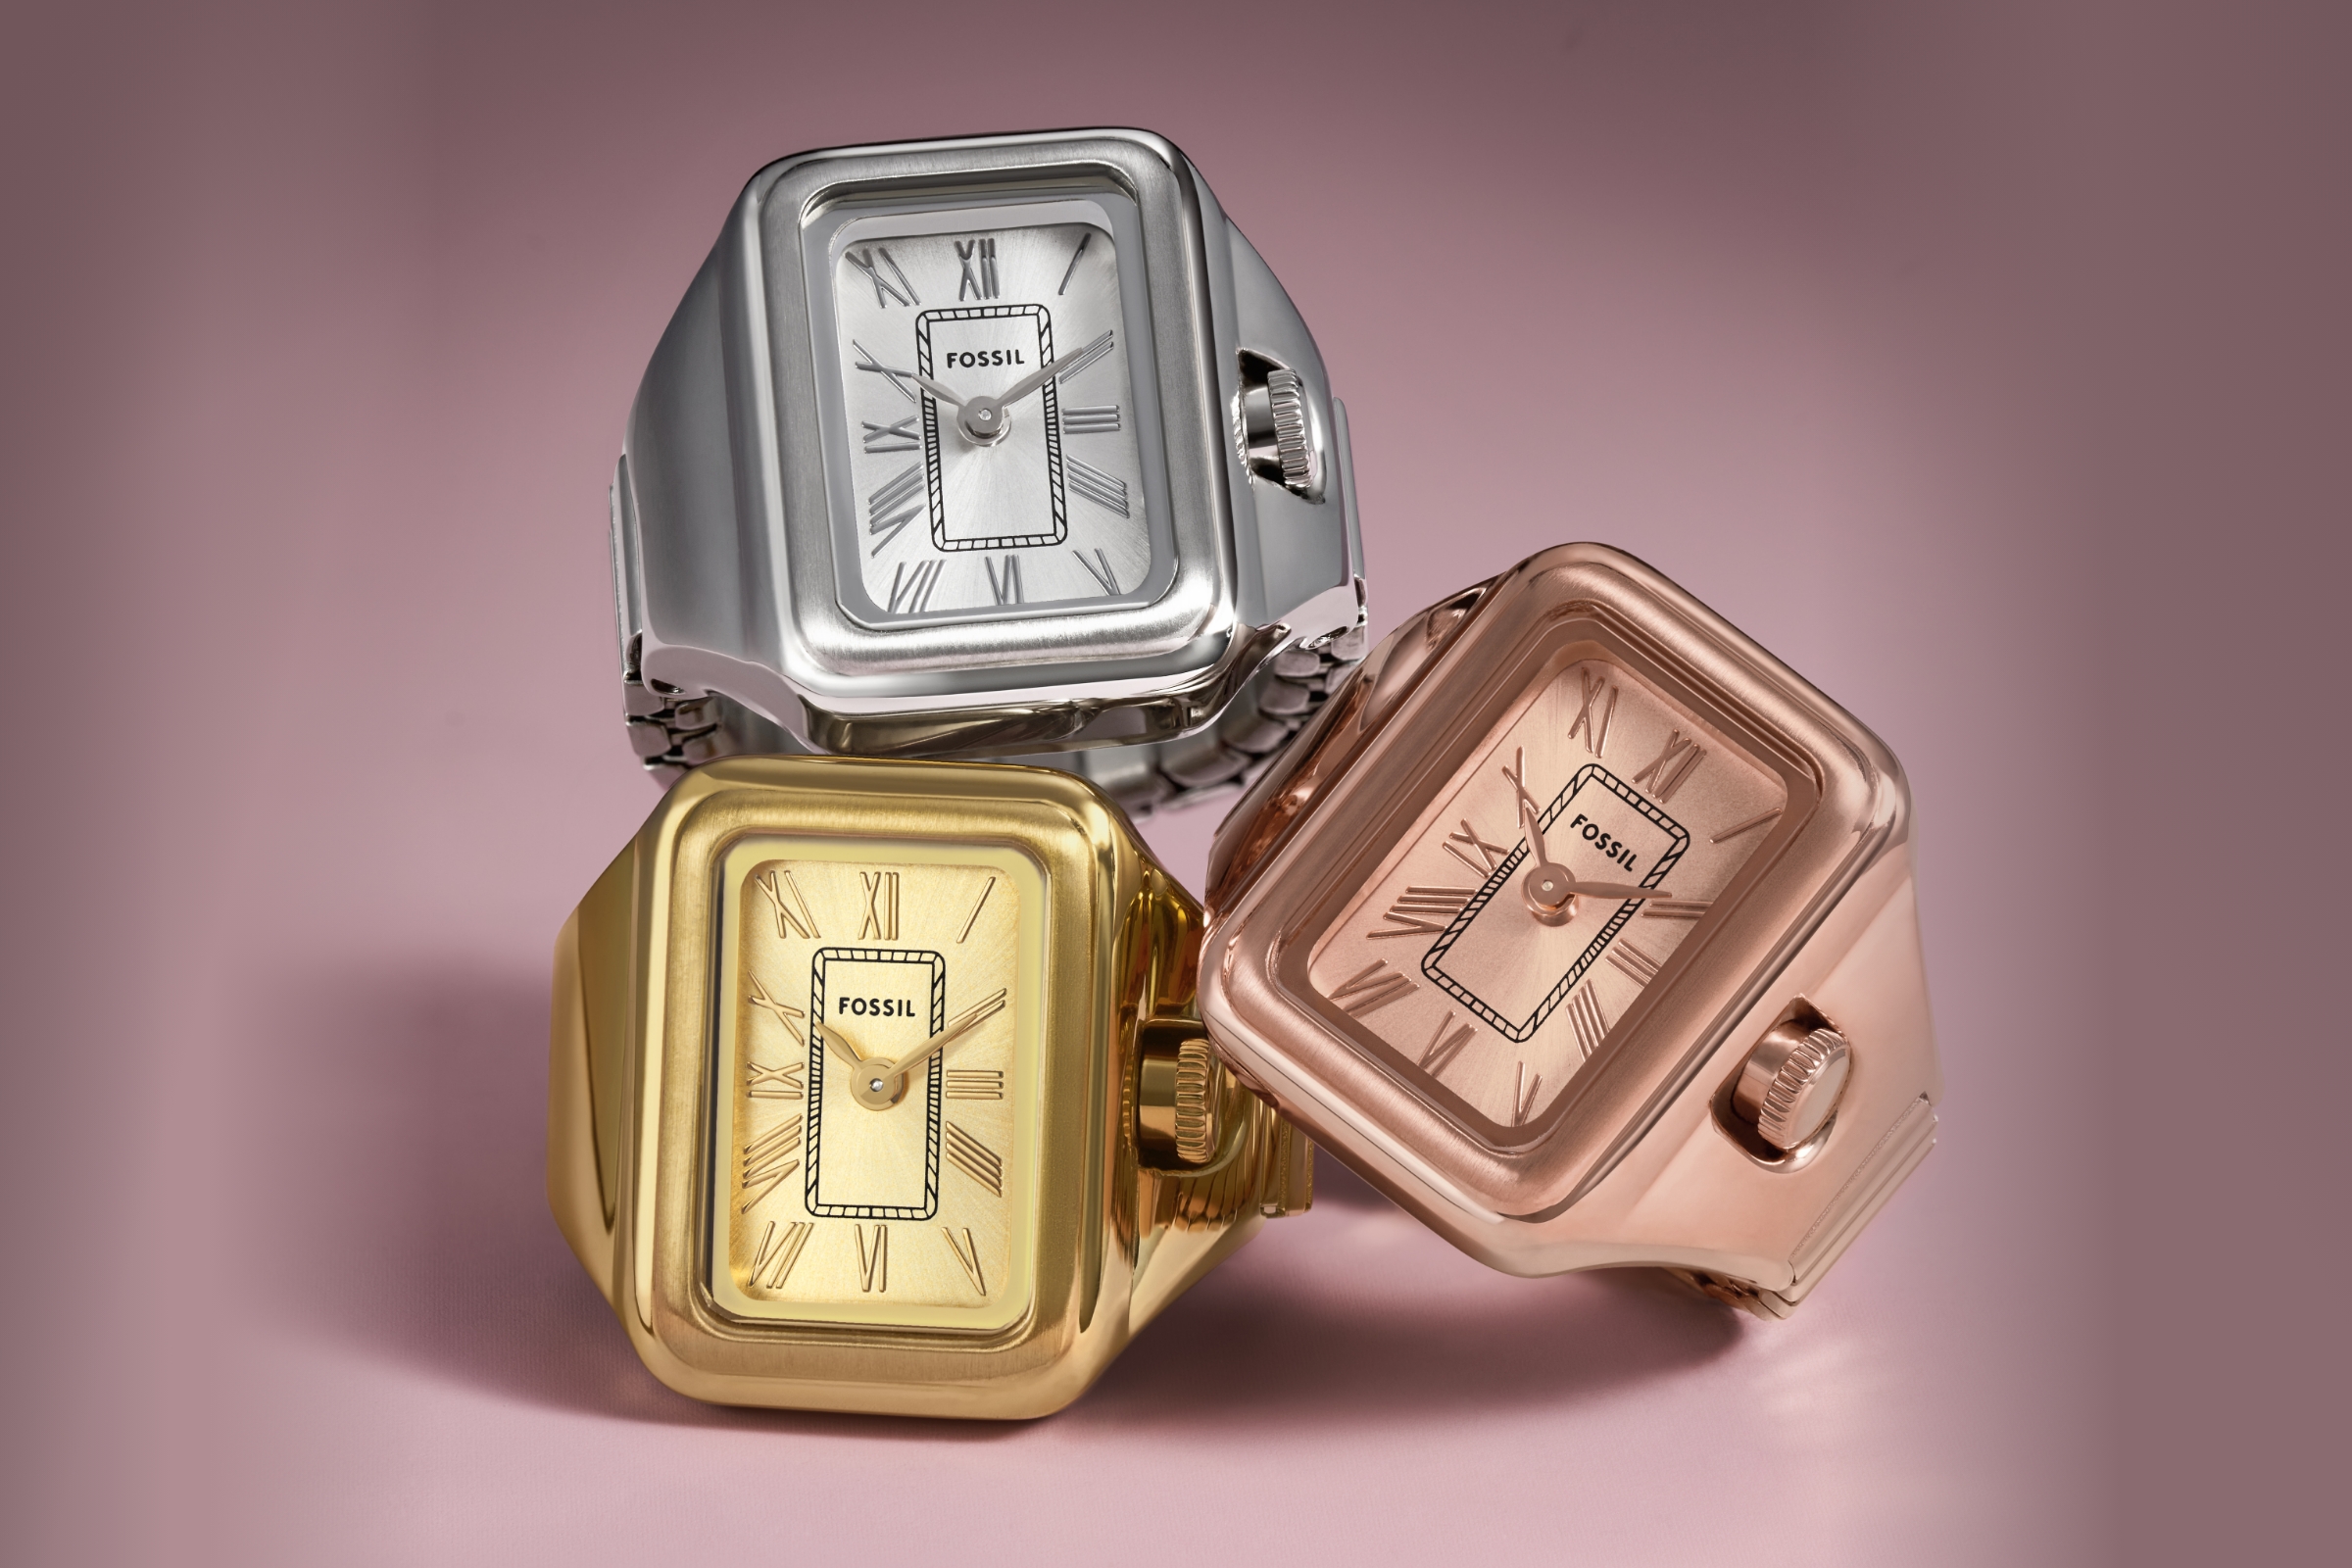 Fossil Raquel Watch Rings in gold, rose gold, and silver set against pink background